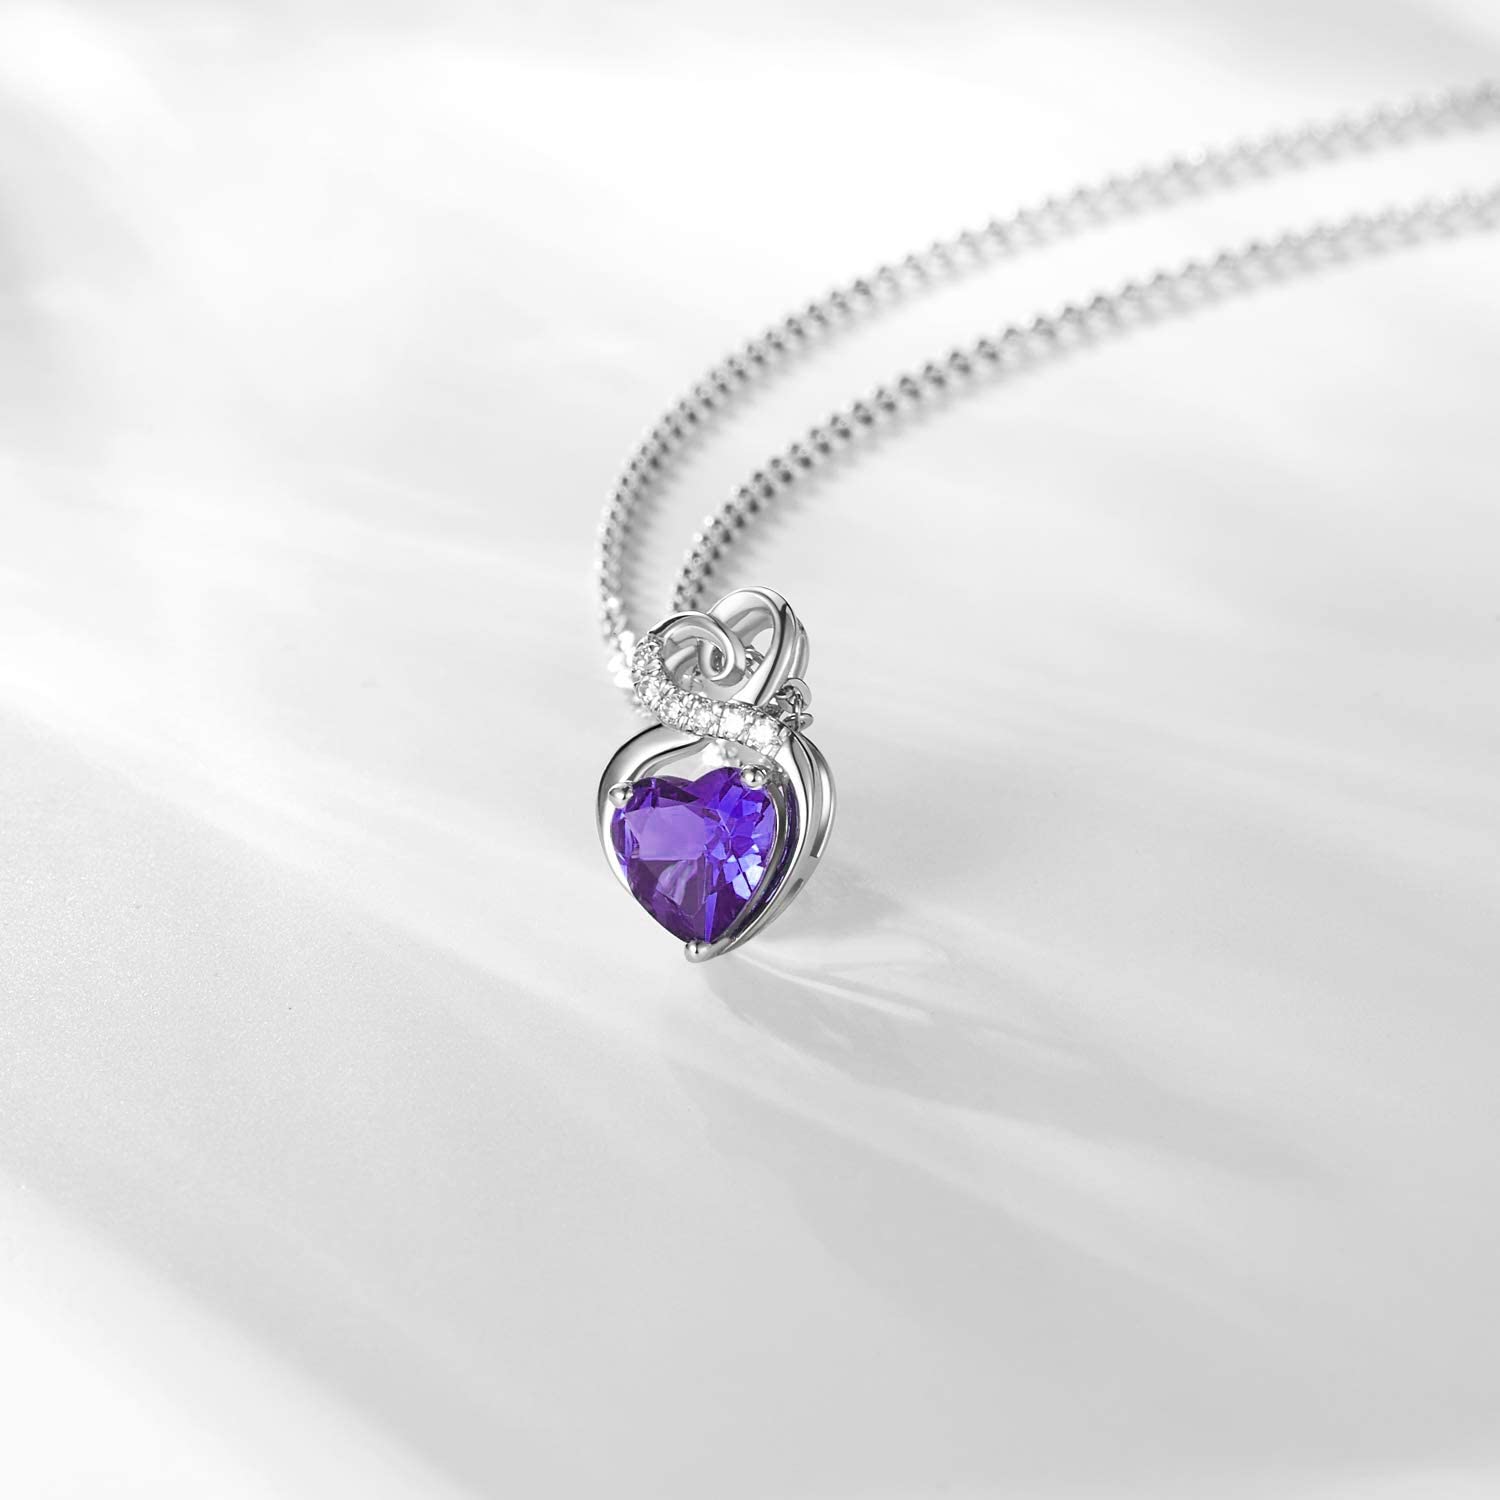 FANCIME "Infinity Heart" Amethyst February Gemstone Sterling Silver Necklace Detail